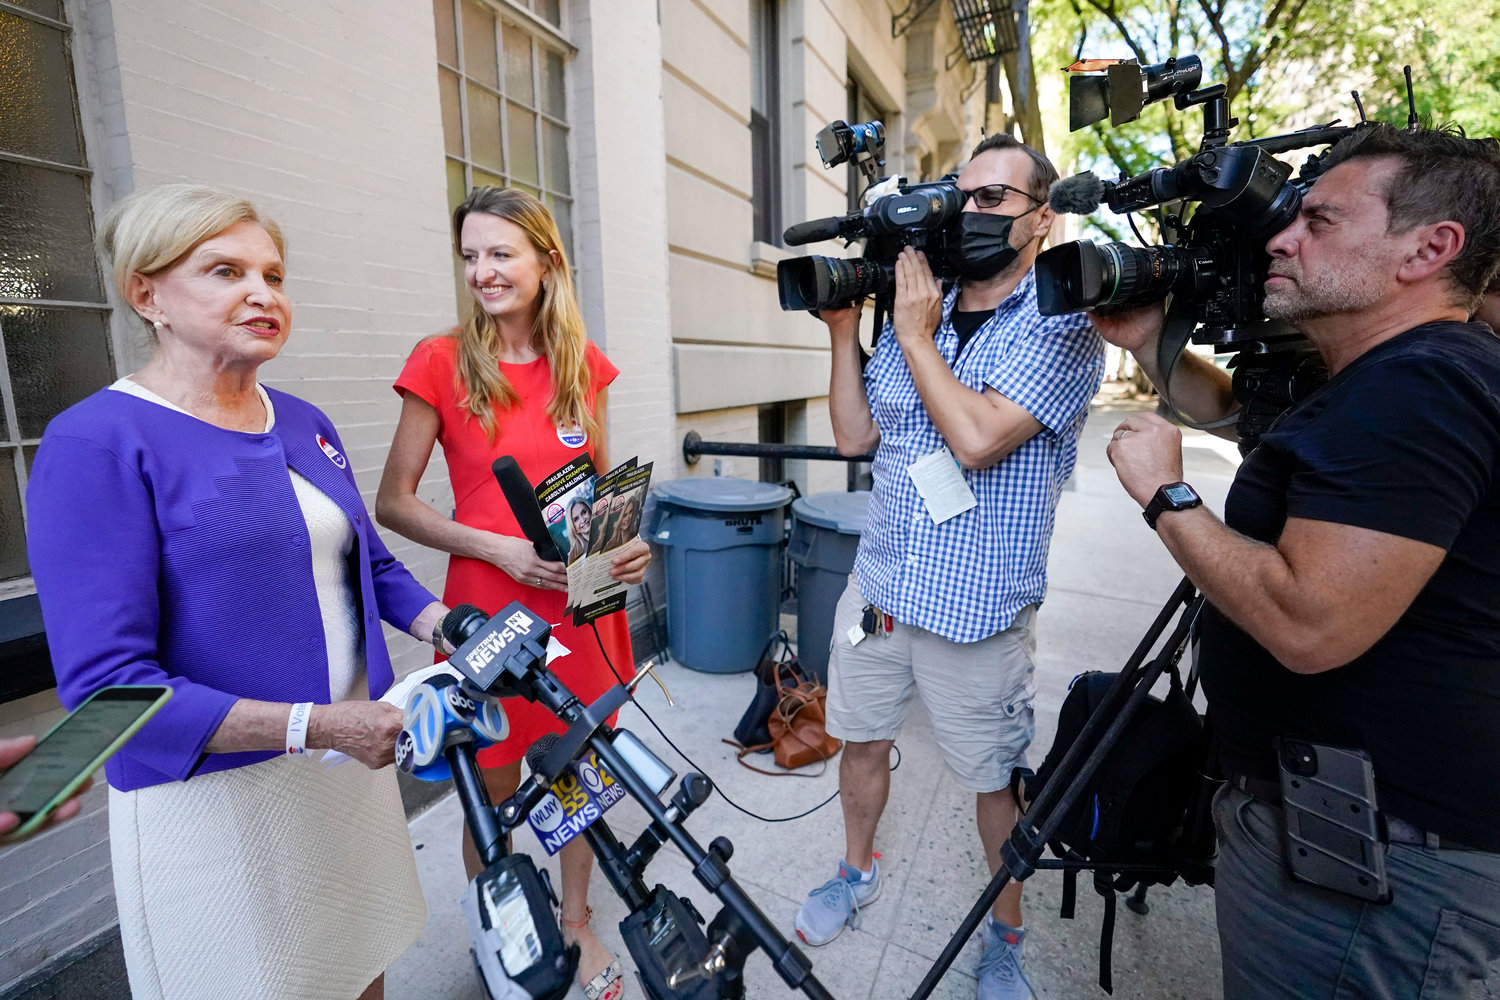 Rep. Carolyn Maloney, left, with her daughter Virginia talks to reporters after casting her vote in the Democratic primary election, Aug. 18, 2022, in New York. Maloney is running against attorney Suraj Patel and Rep. Jerry Nadler in New York's 12th Congressional District Democratic primary. (AP Photo/Mary Altaffer, File)